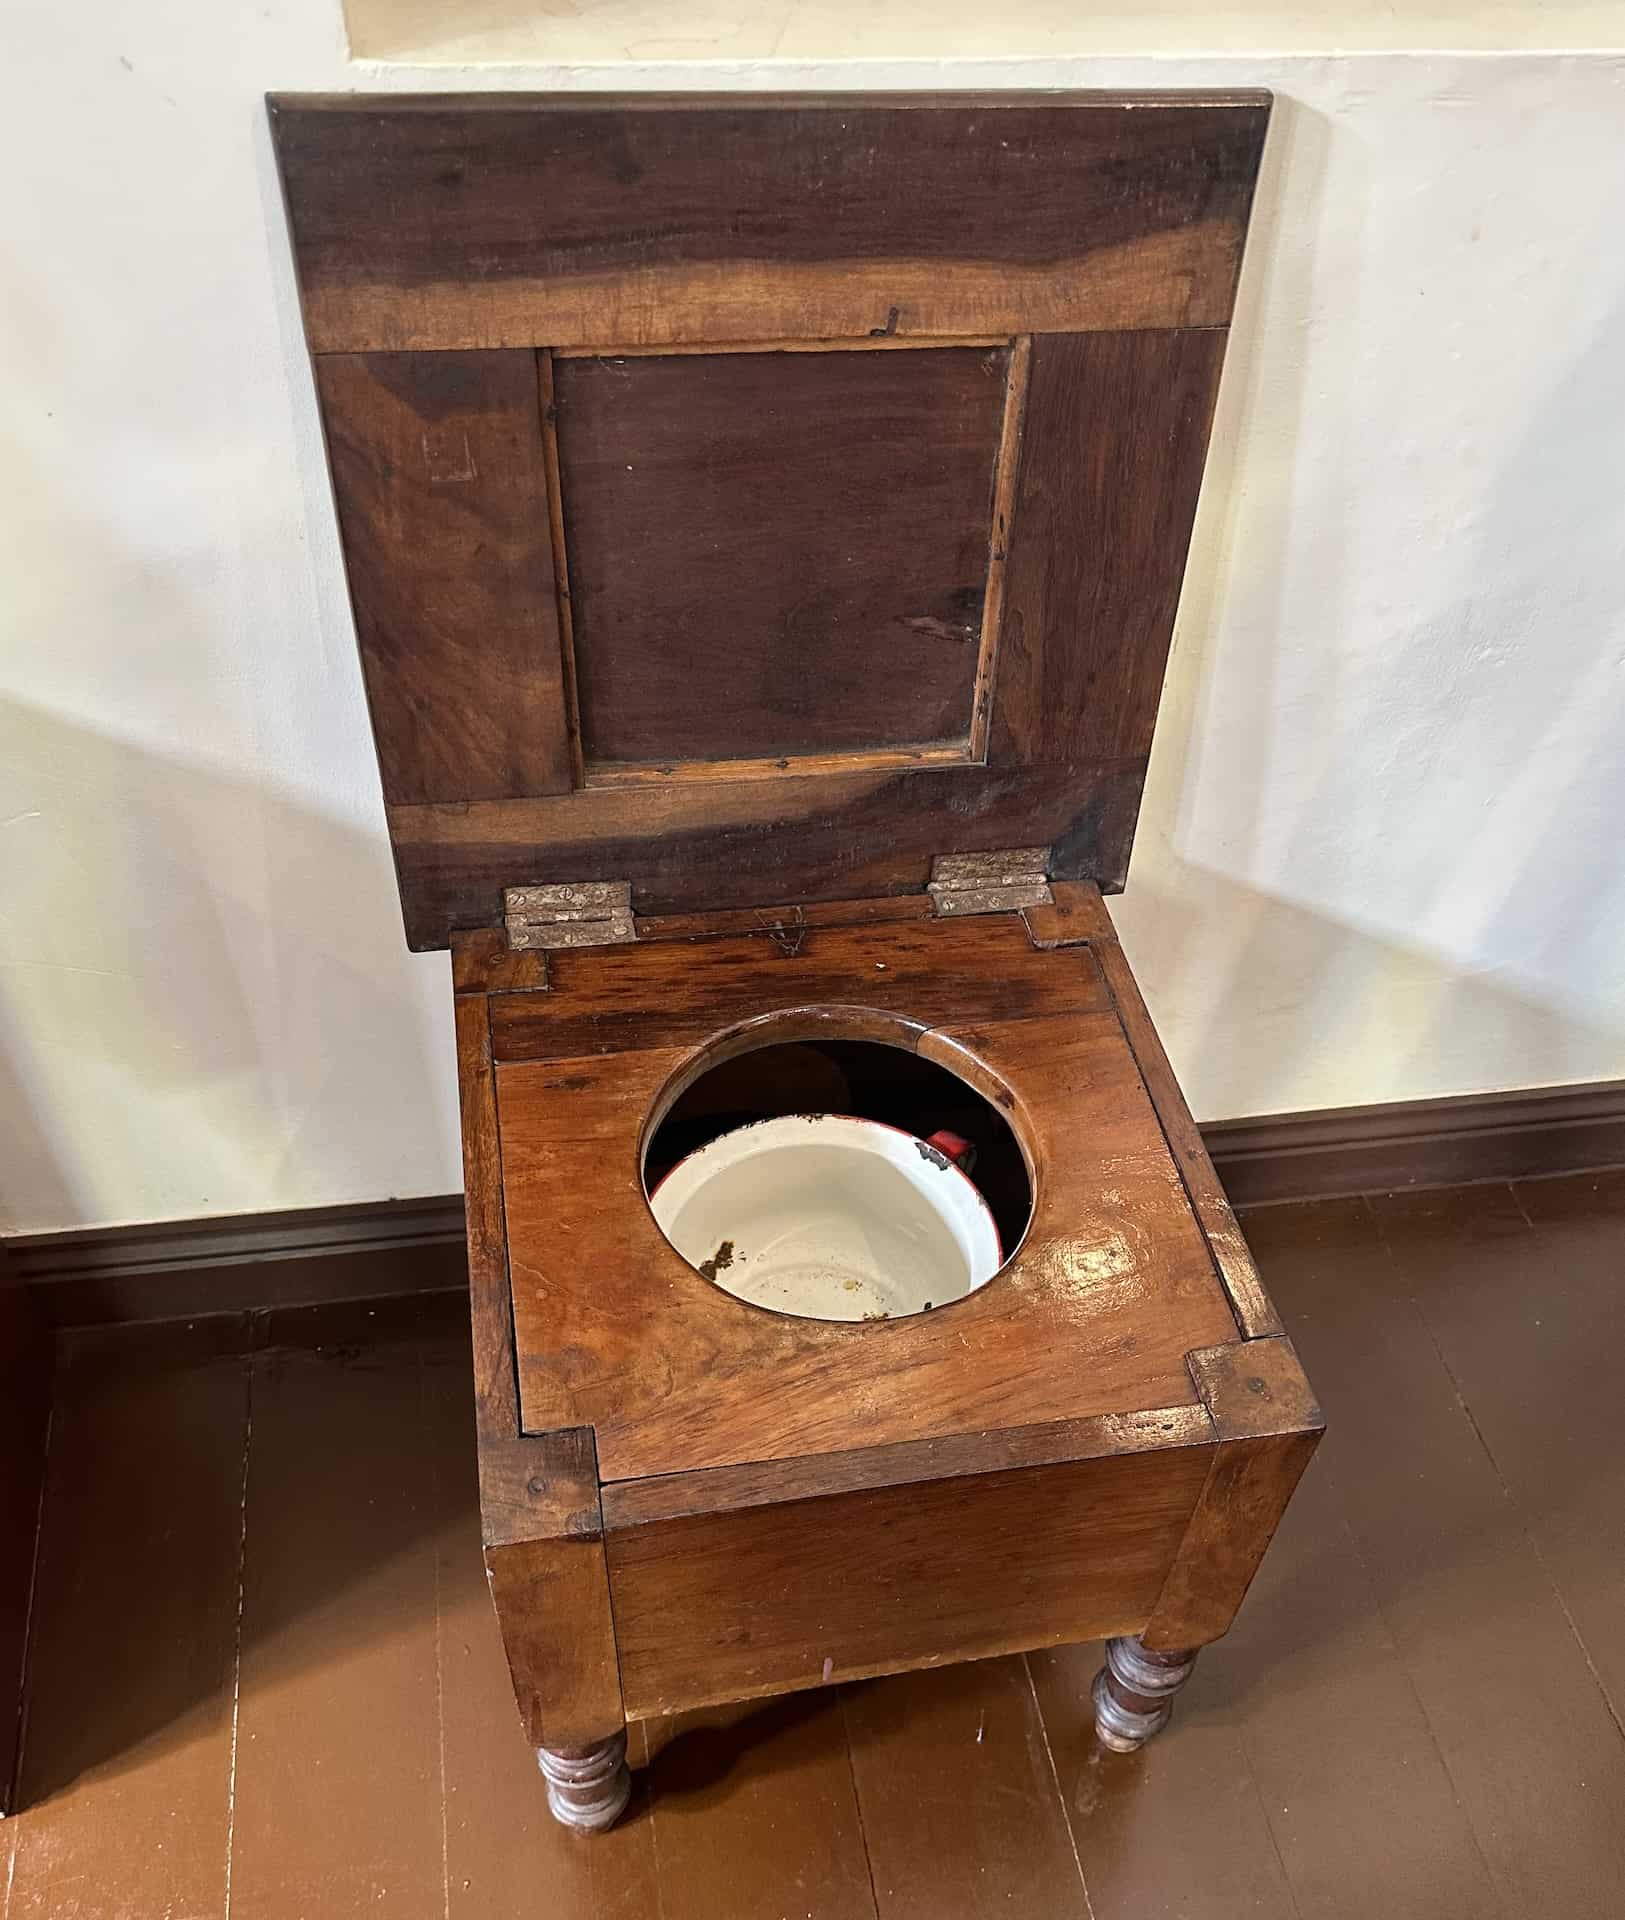 Chamber pot at the Community Museum